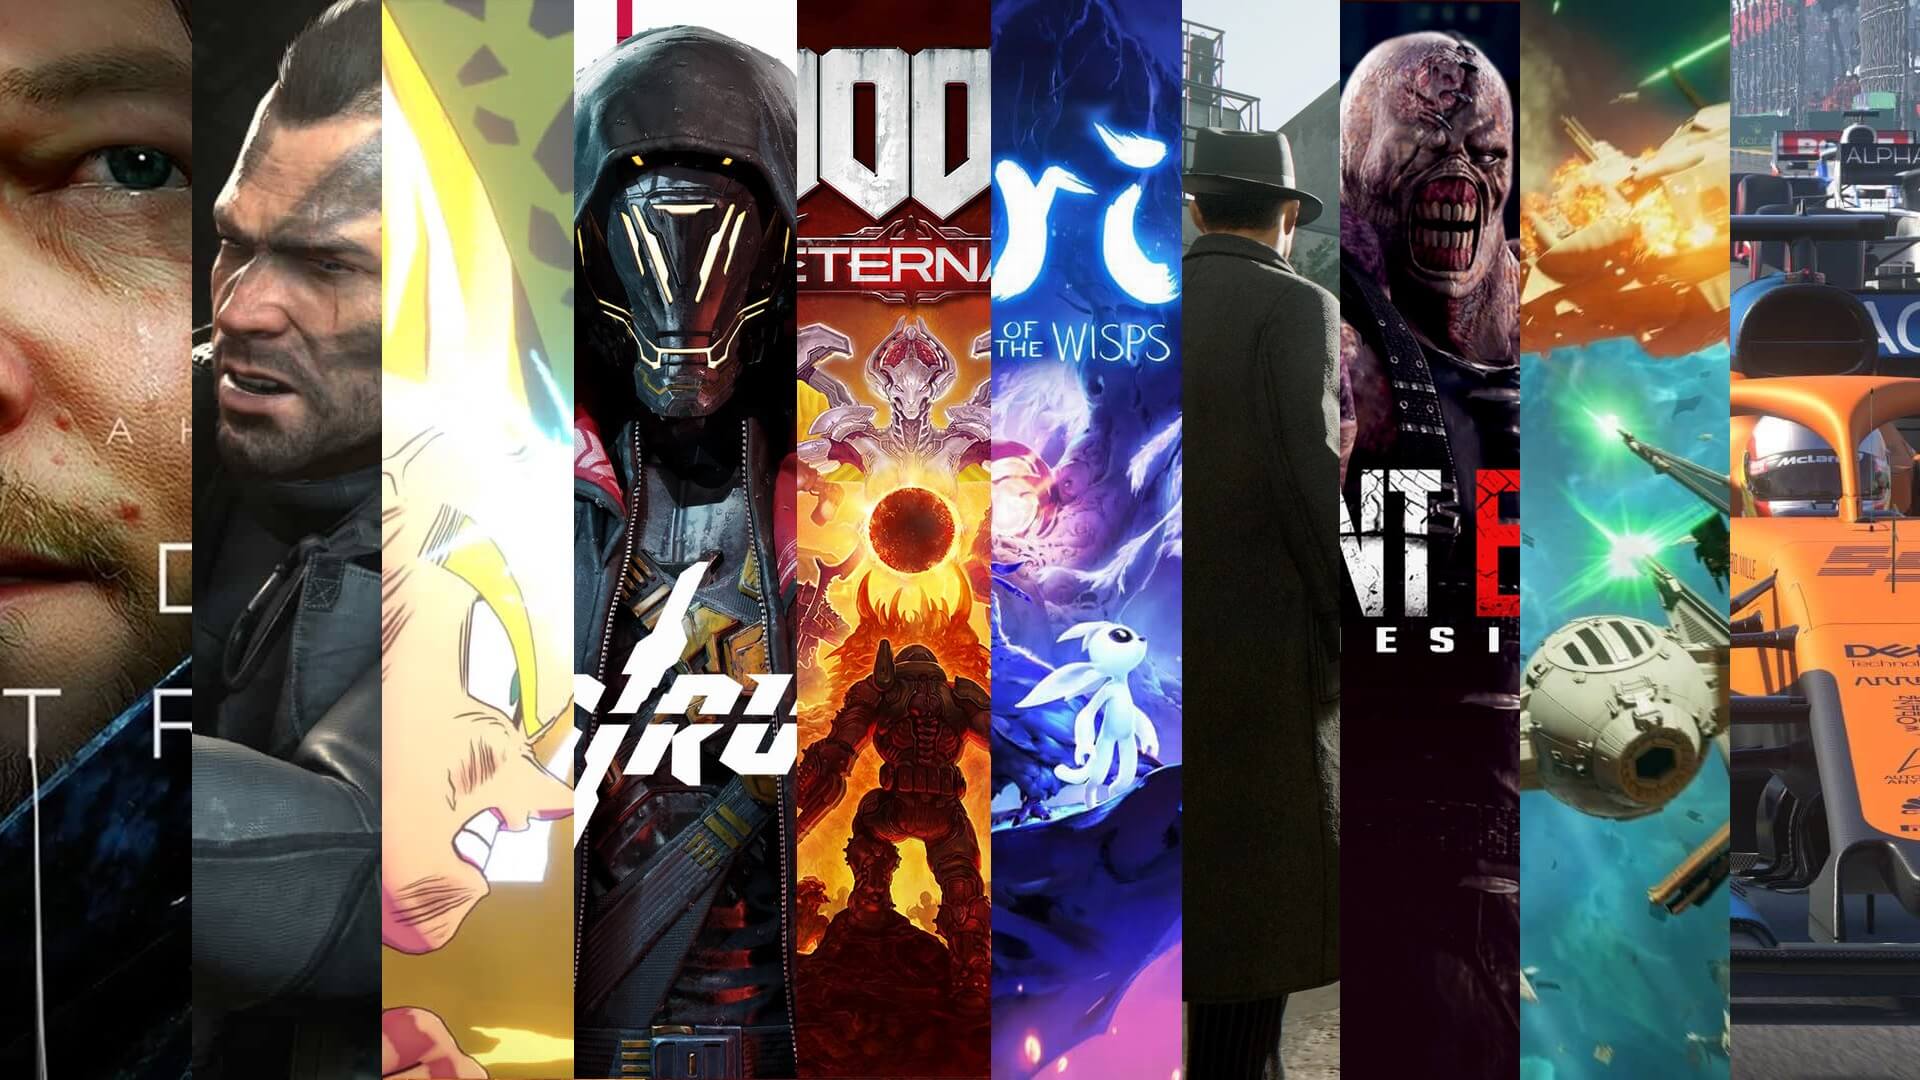 DSOGaming - Here are our Games of the Year 2019